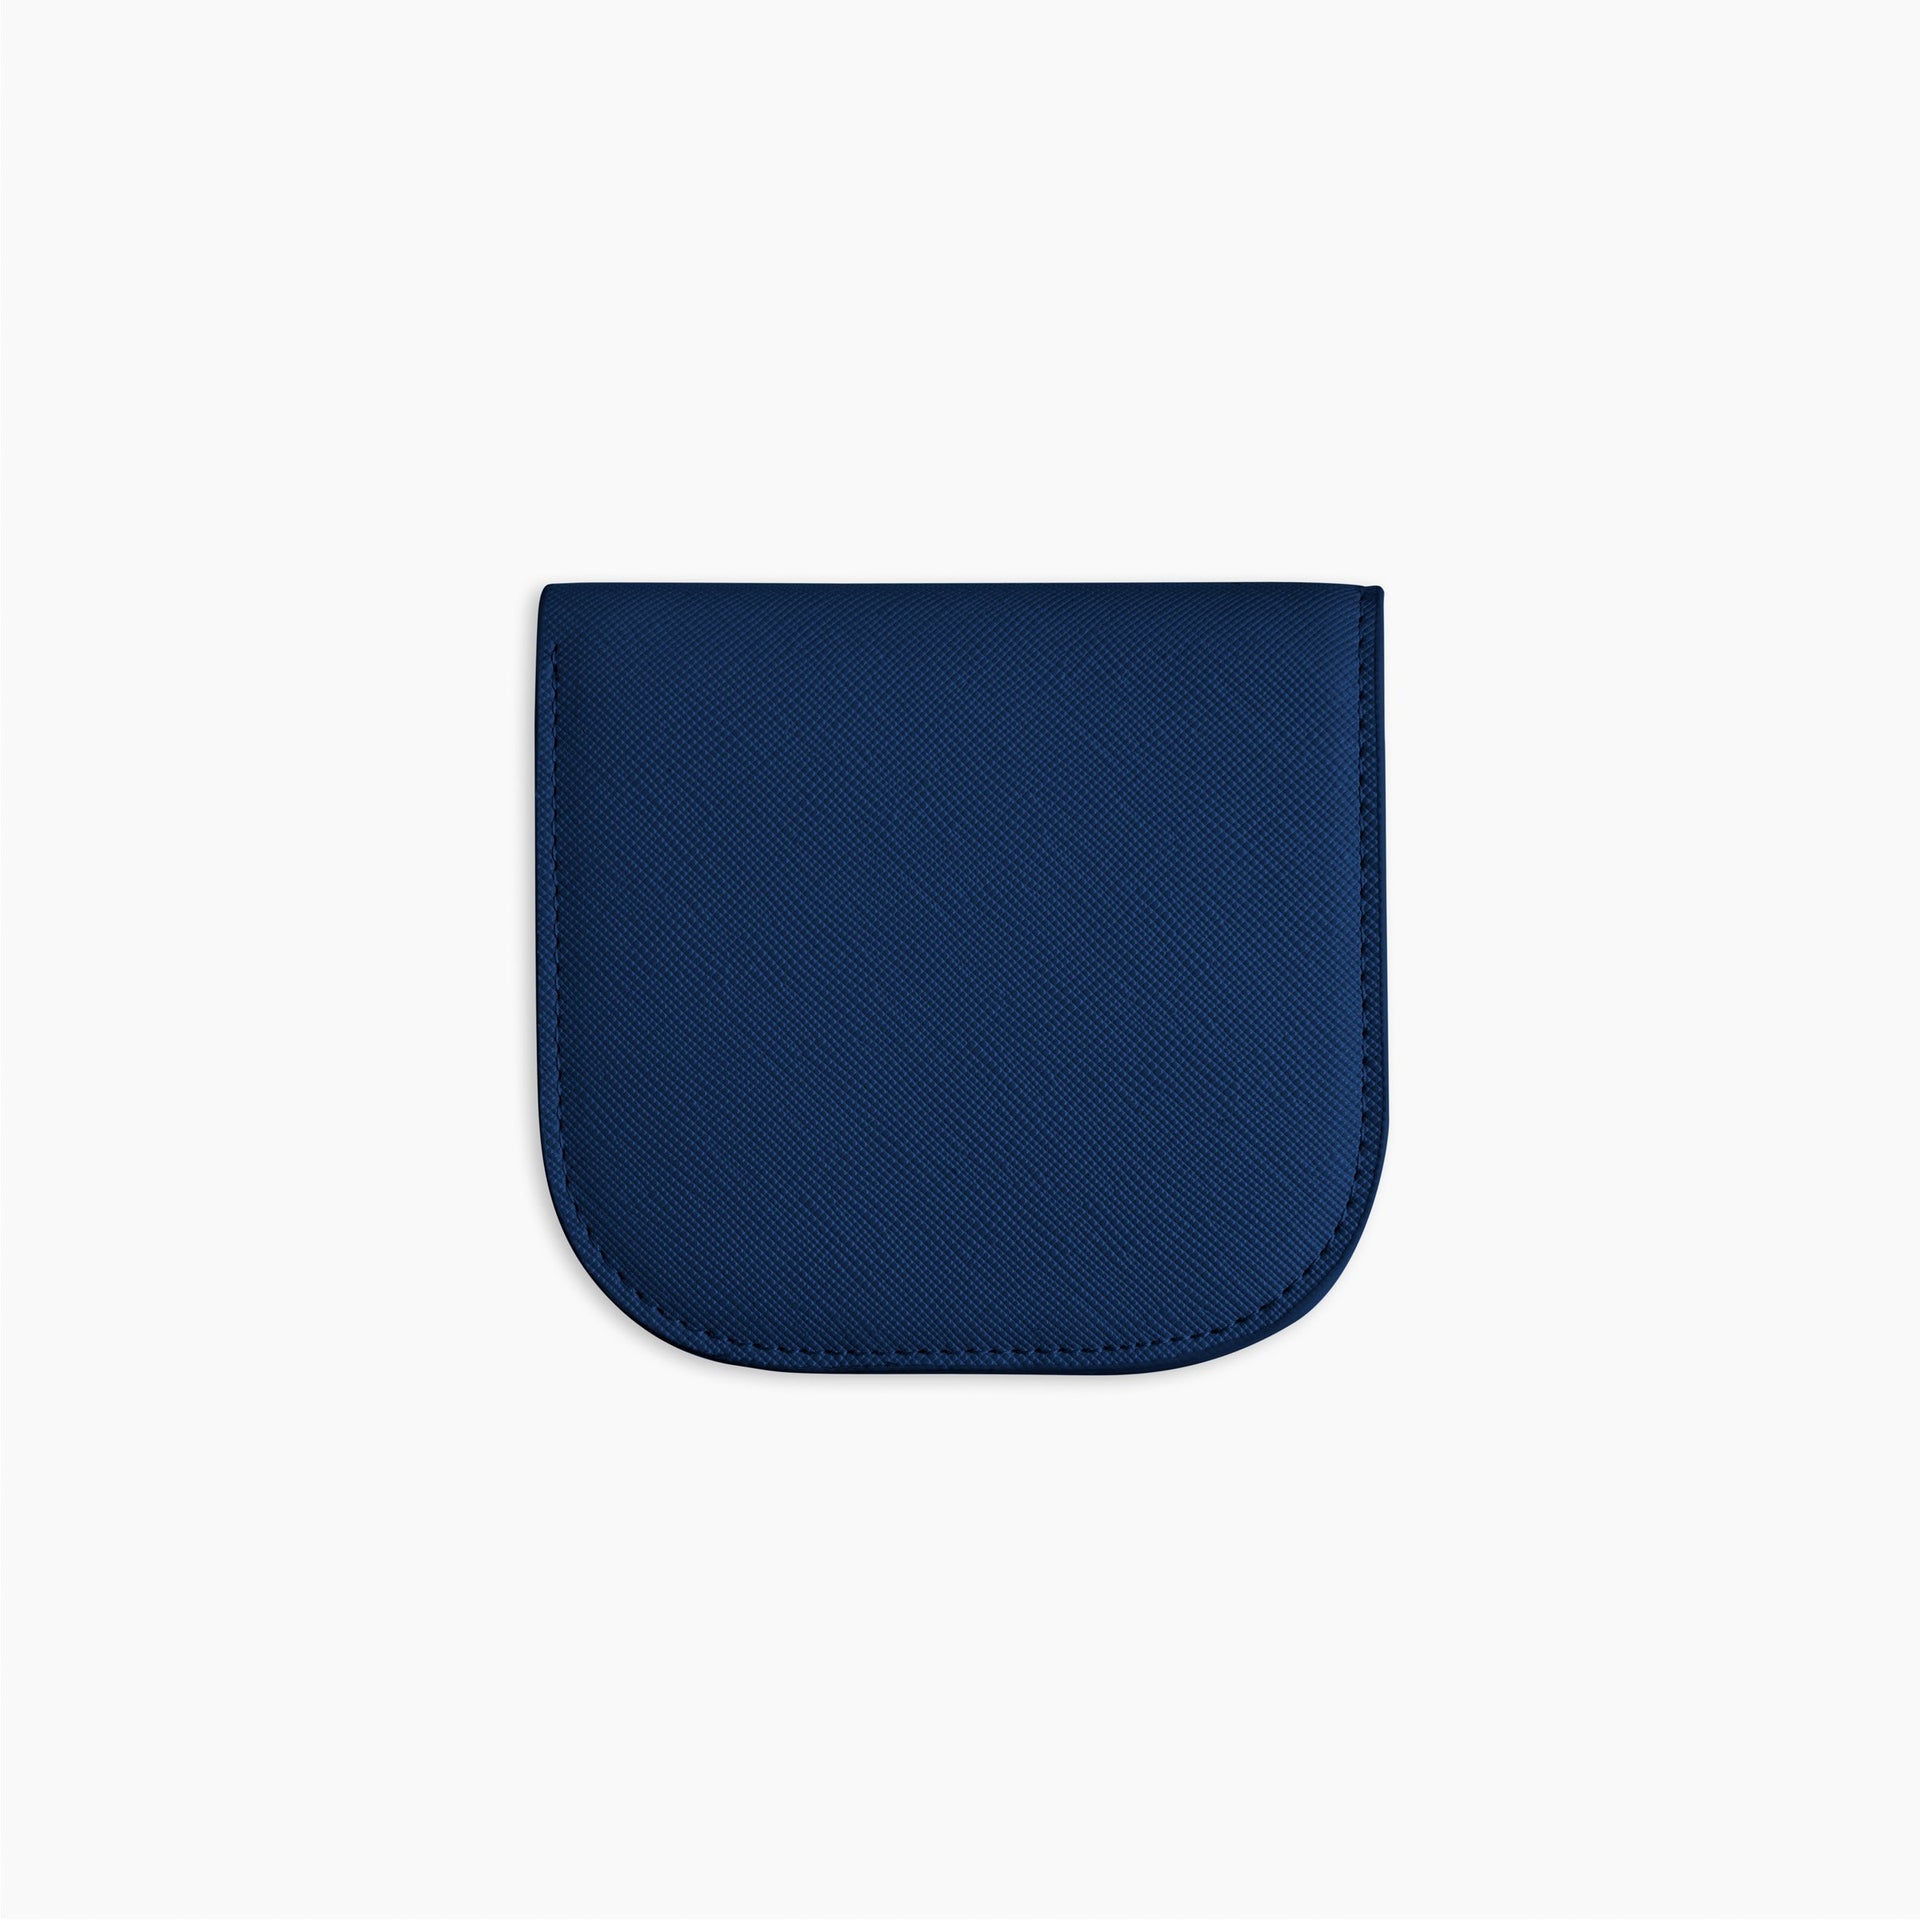 POKETO Dome Wallet in Blue available at Lahn.shop